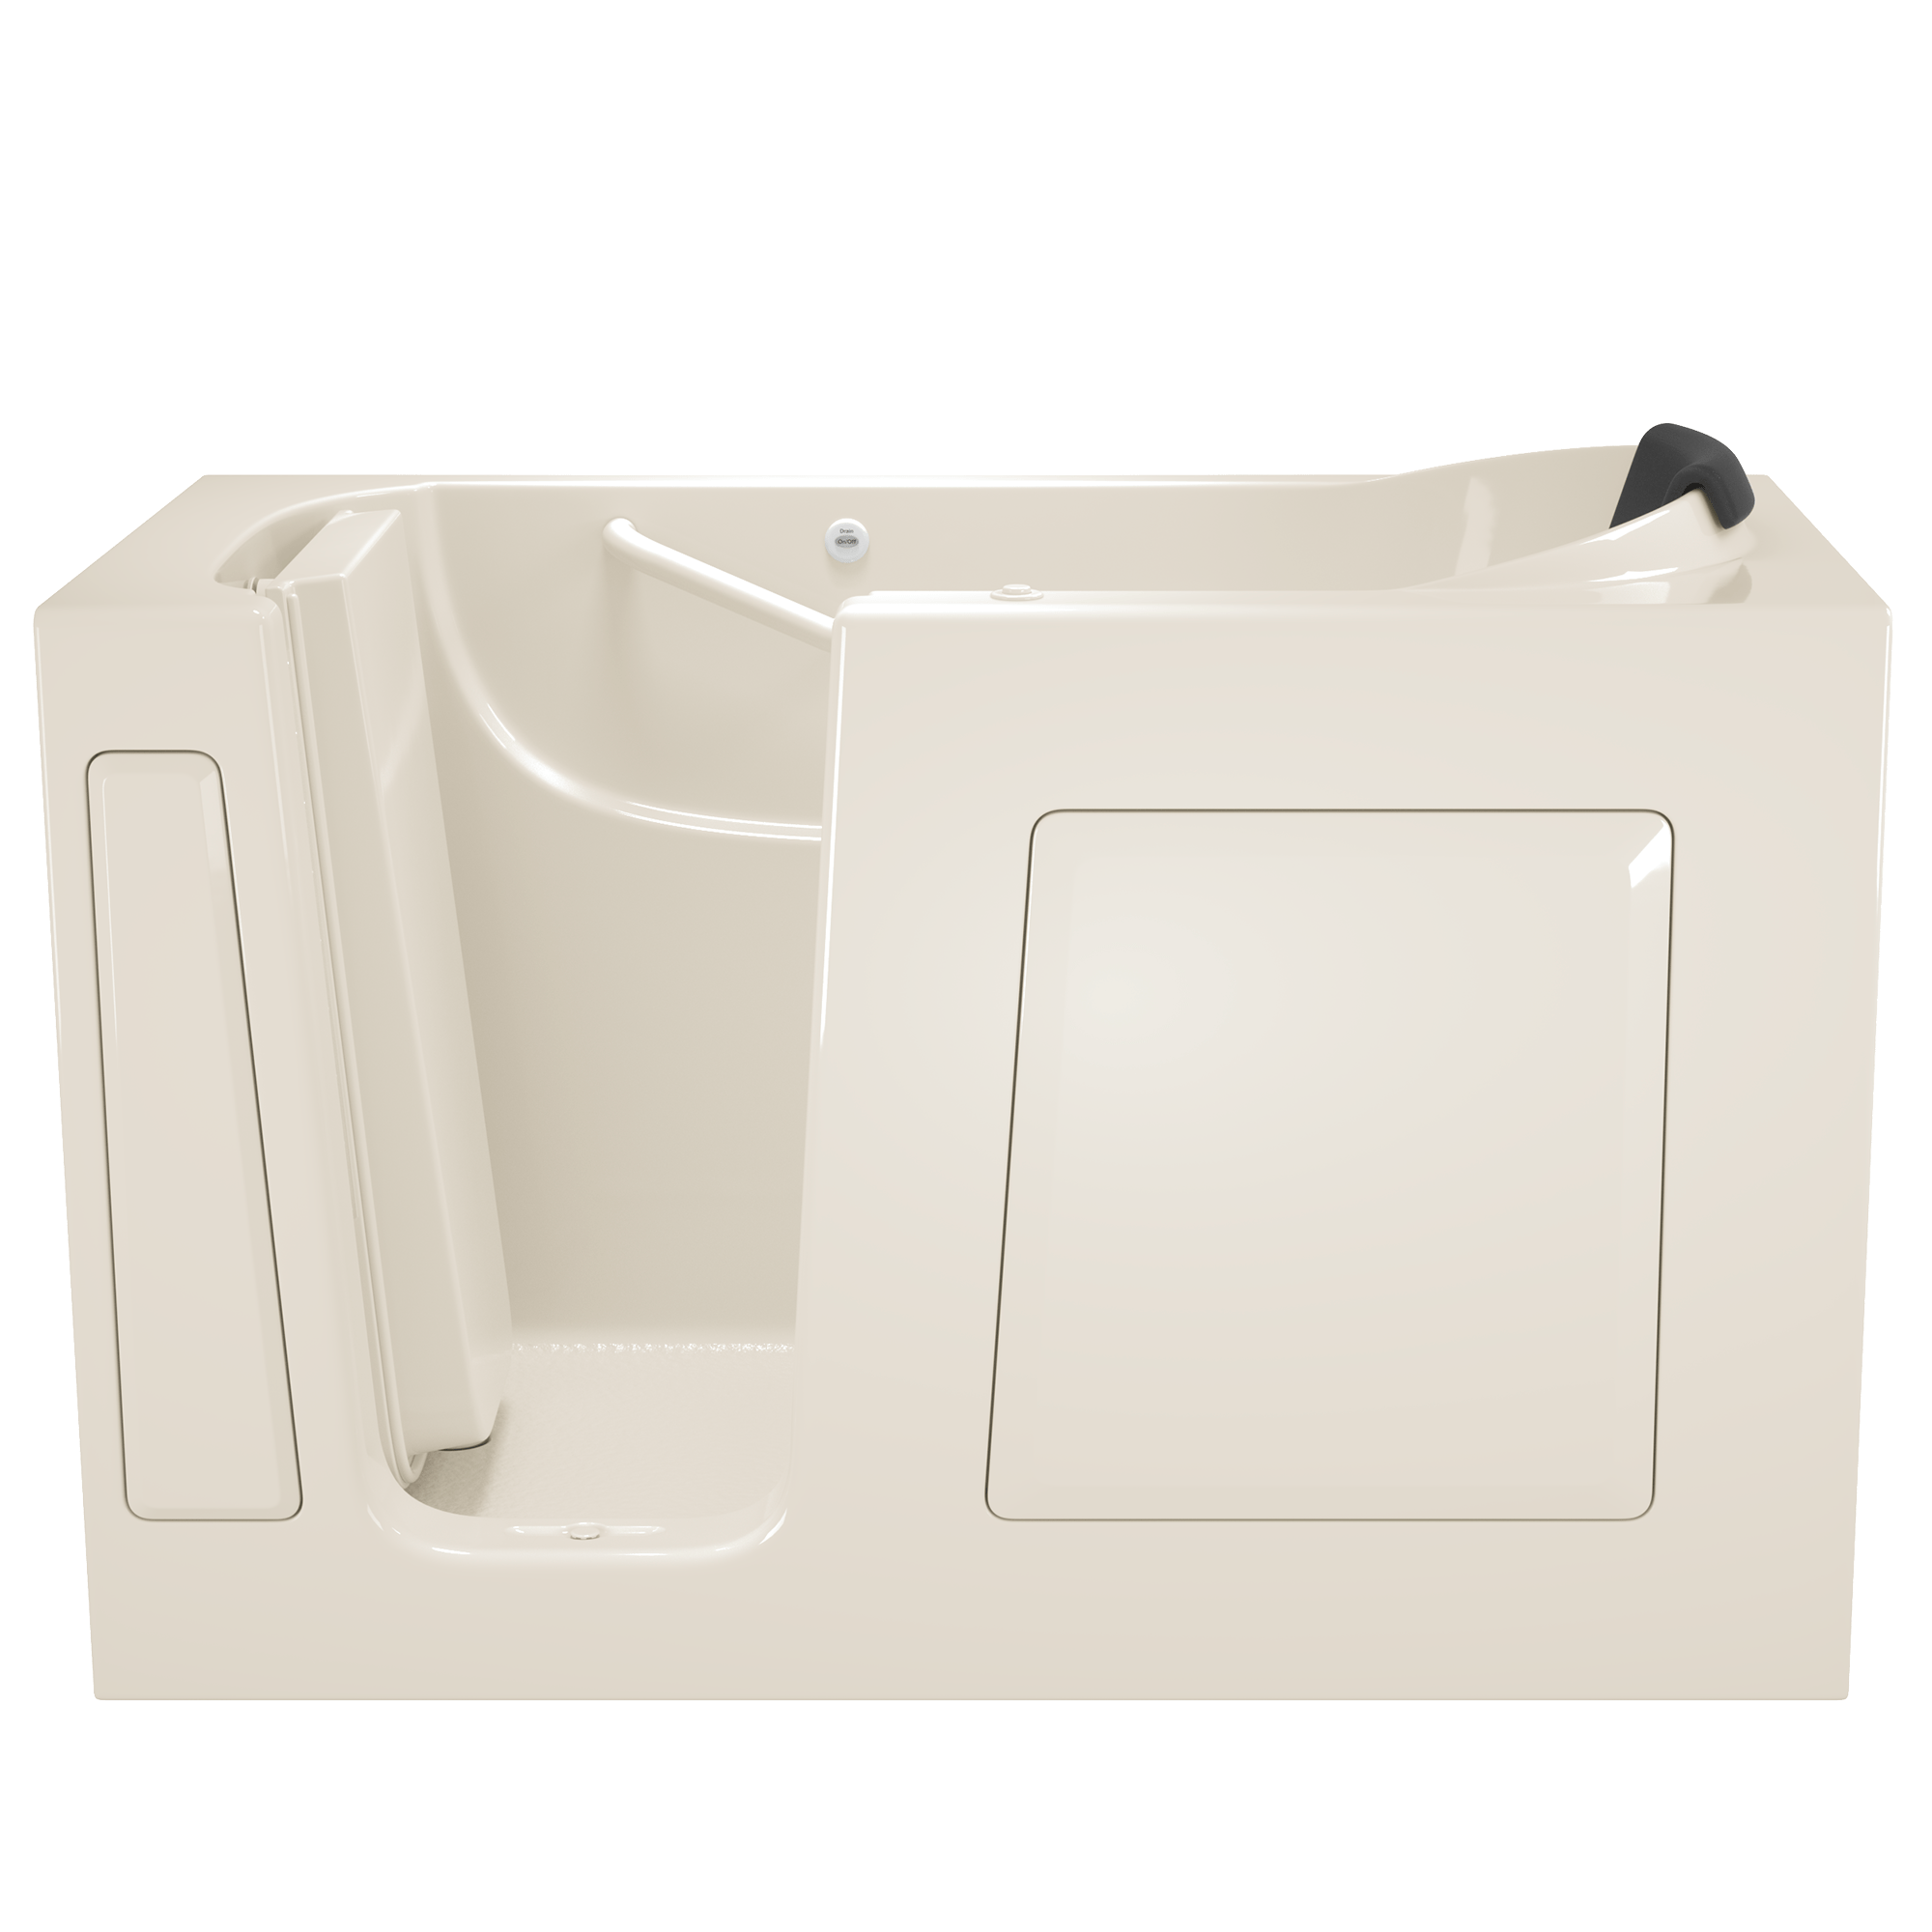 Gelcoat Premium Series 30 x 60 -Inch Walk-in Tub With Whirlpool System - Left-Hand Drain